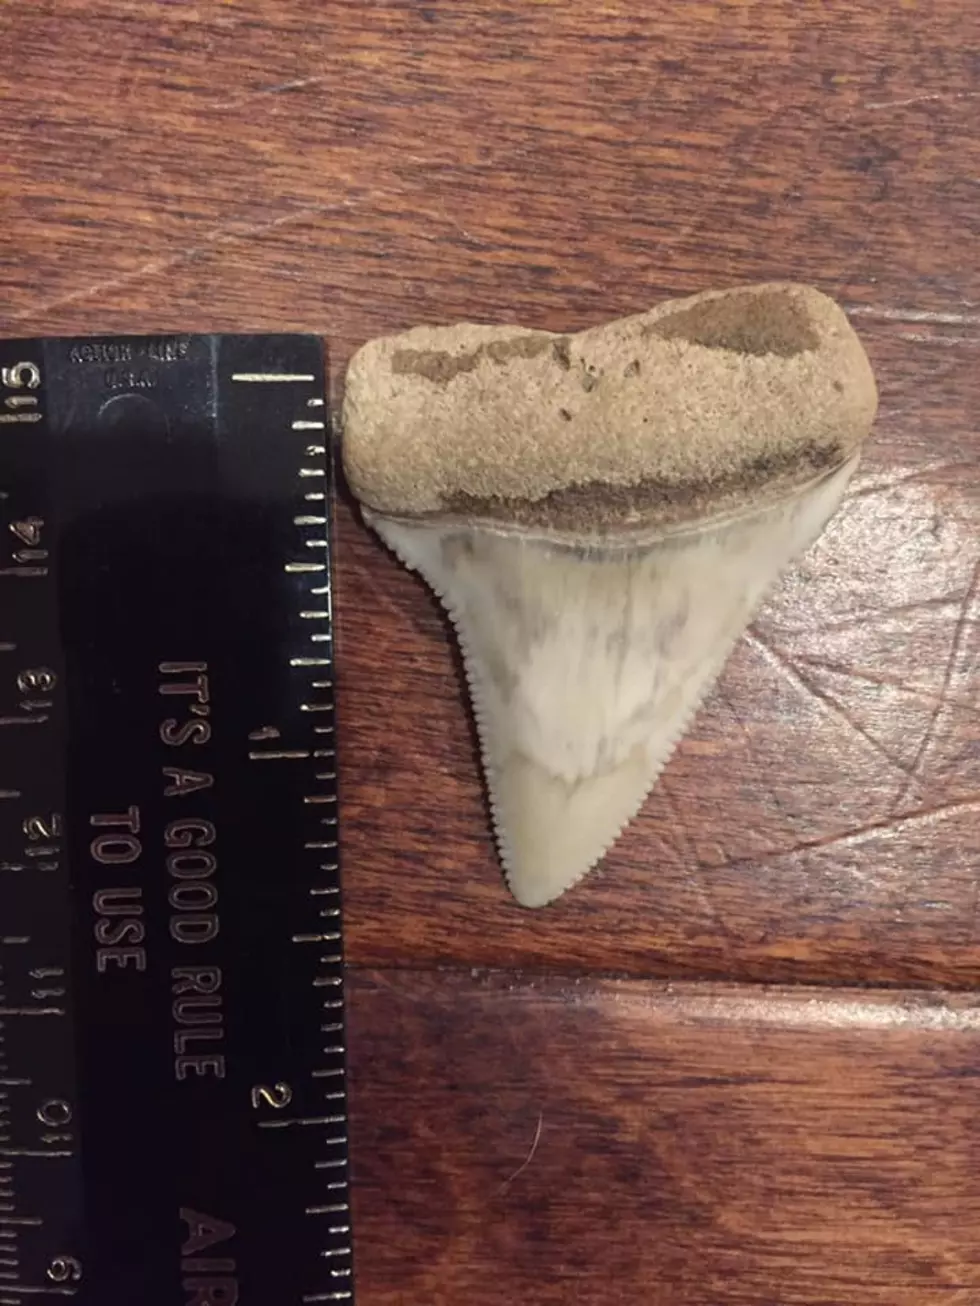 Shark Tooth That is Millions of Years Old Found on Dauphin Island